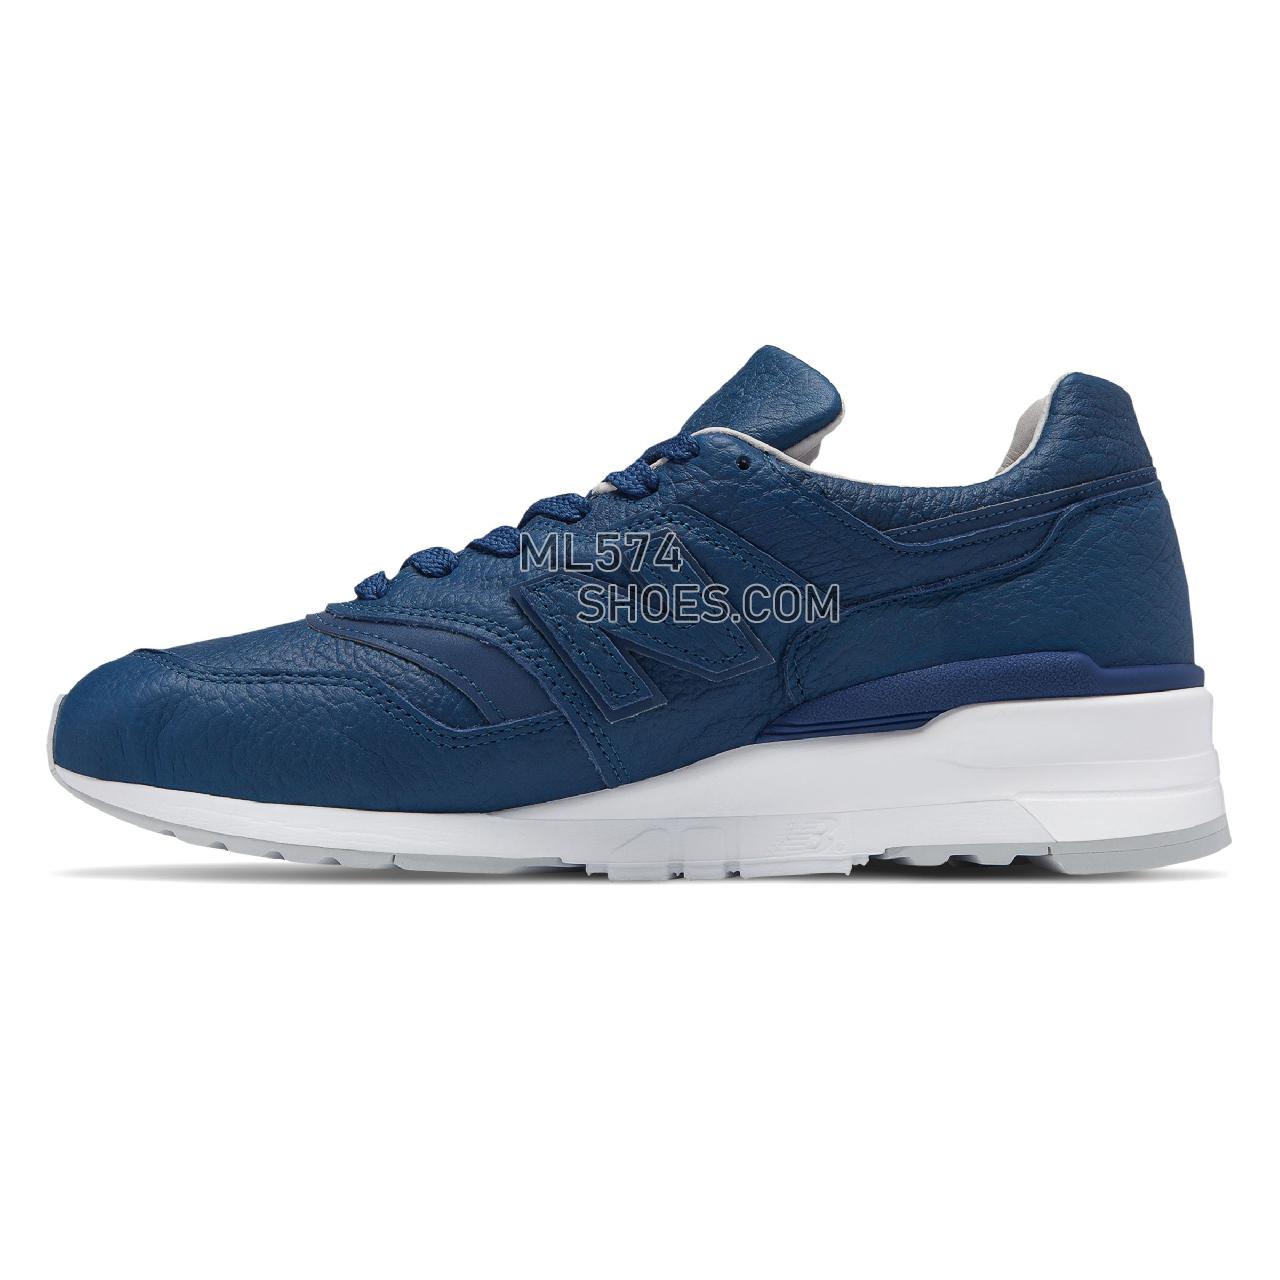 New Balance Made in US 997 Bison - Men's 997 Made in US Classic M997-LH - Blue with Grey - M997BIS